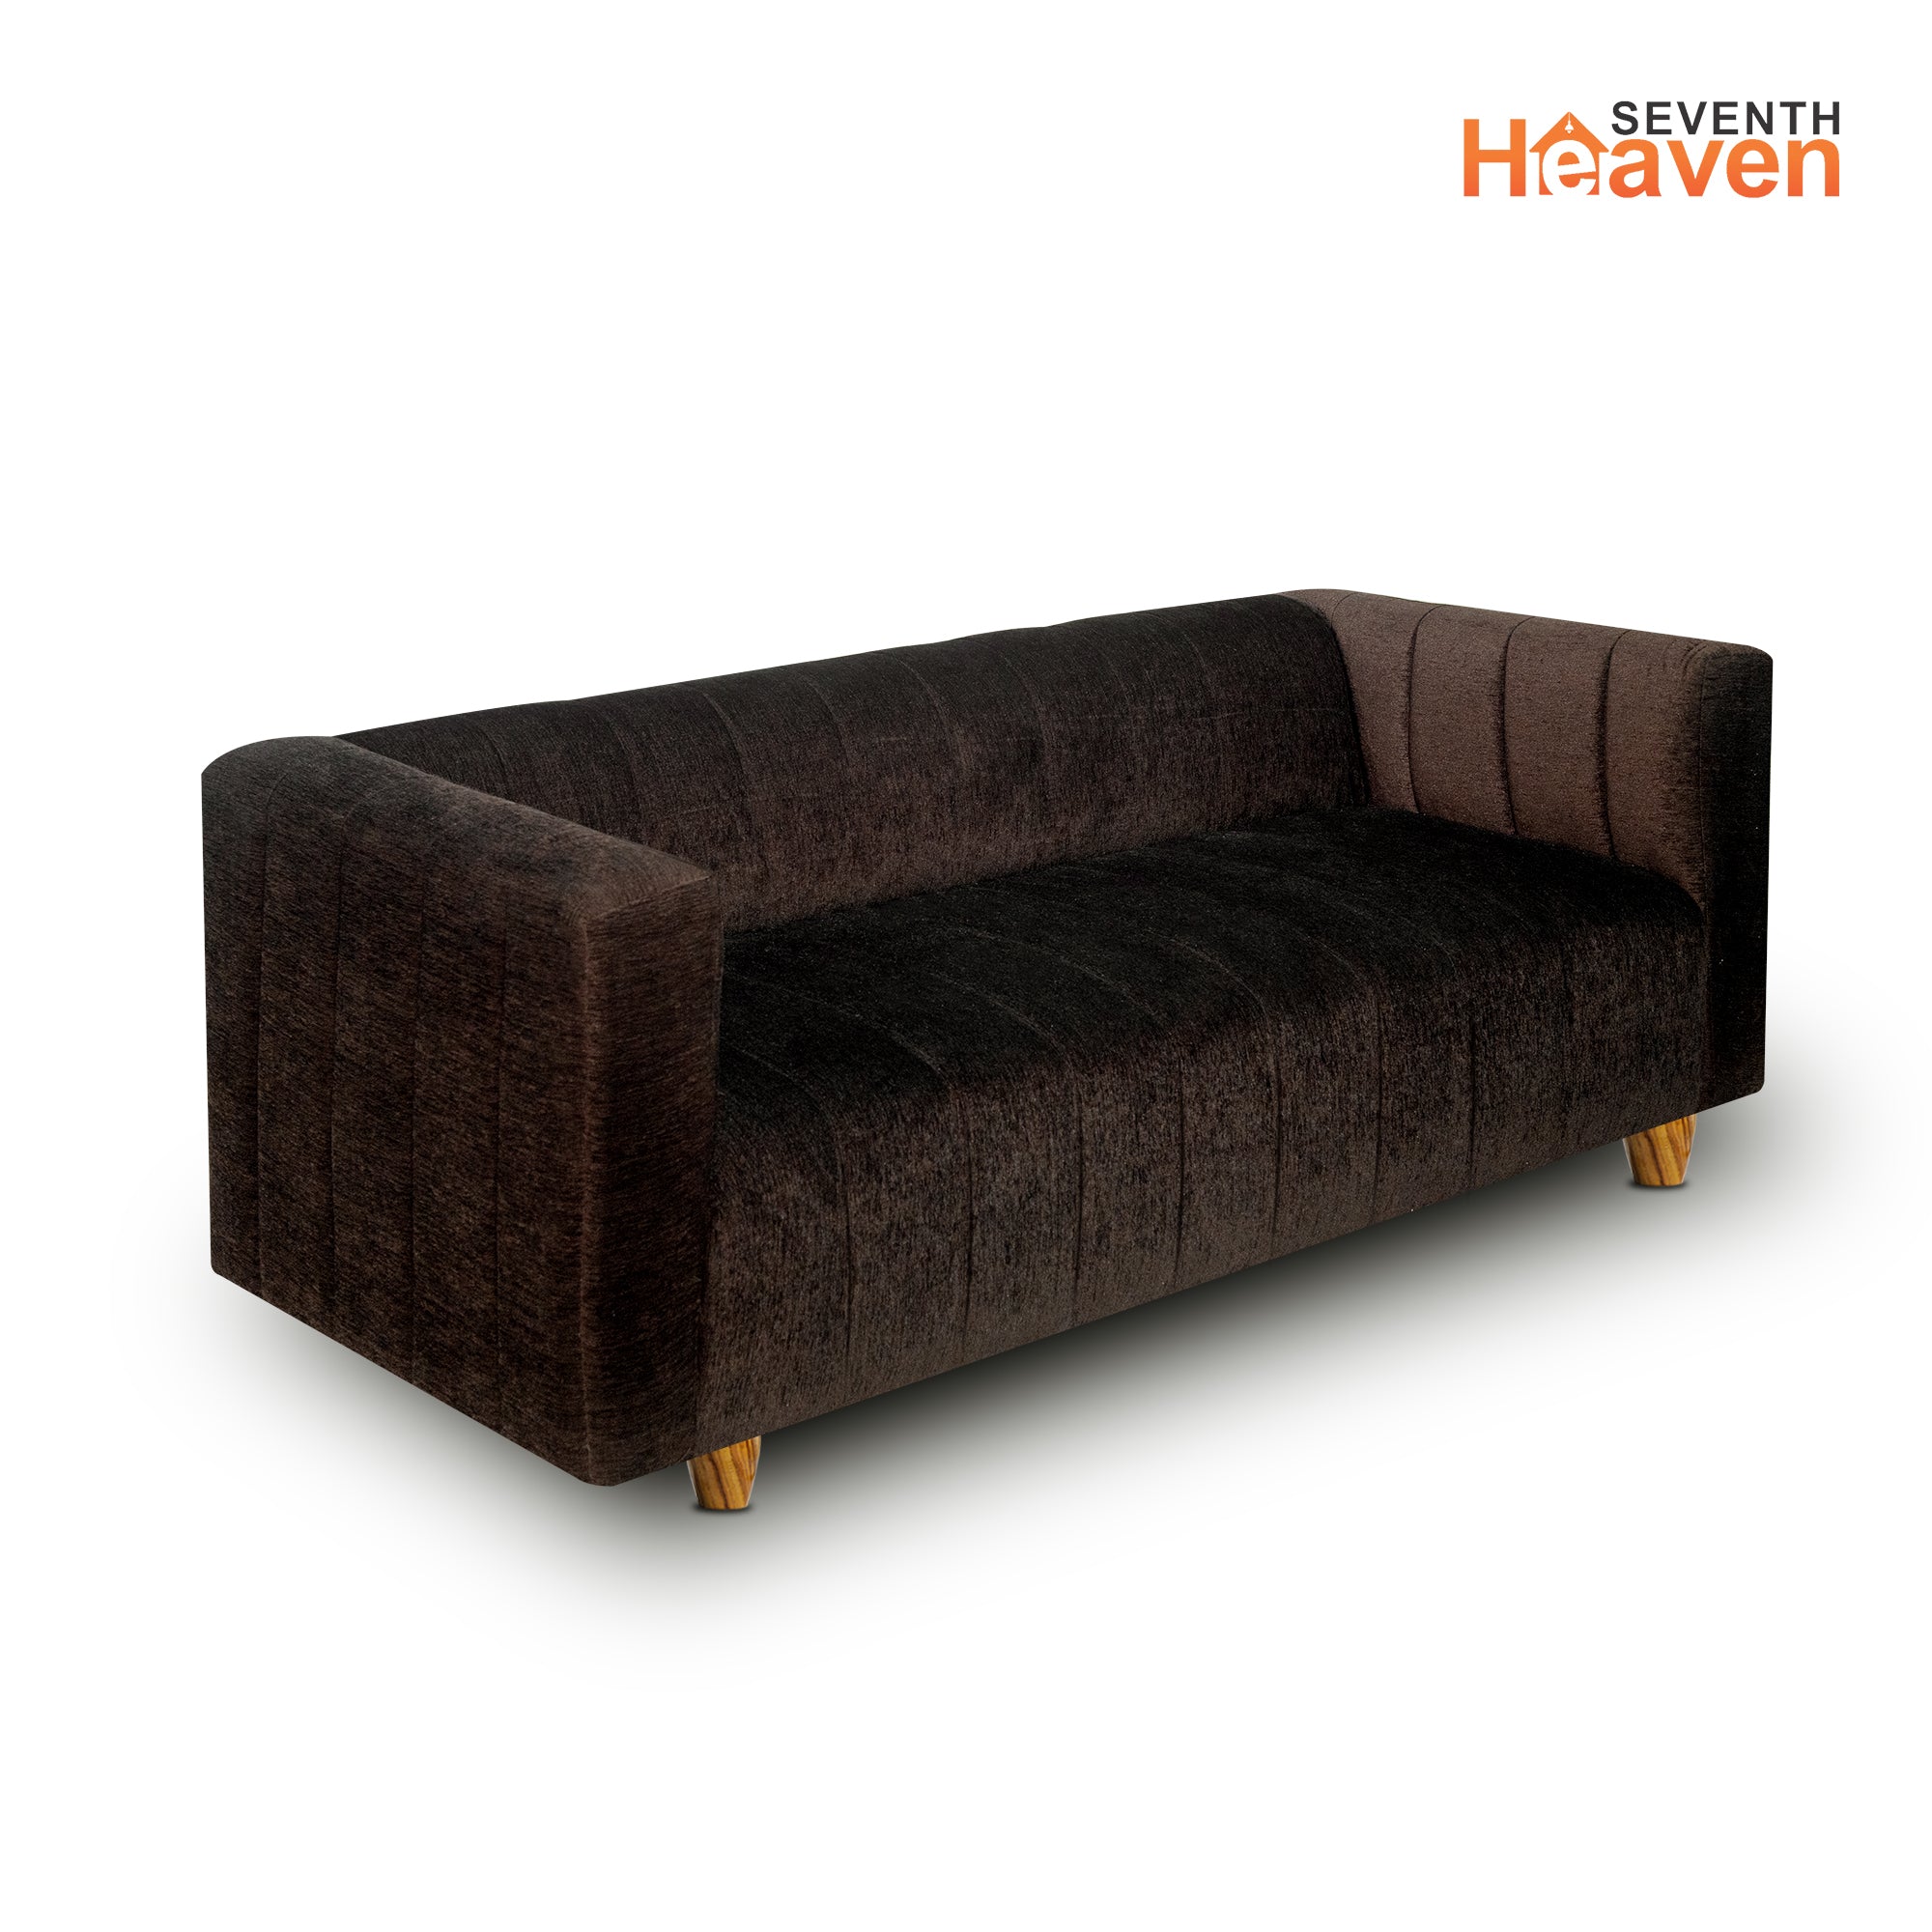 Seventh Heaven Tokyo 3 Seater Sofa, Extra Spacious, Chenille Molfino Fabric: 3 Year Warranty Fabric 3 Seater Sofa  (Finish Color -Brown, DIY(Do-It-Yourself)